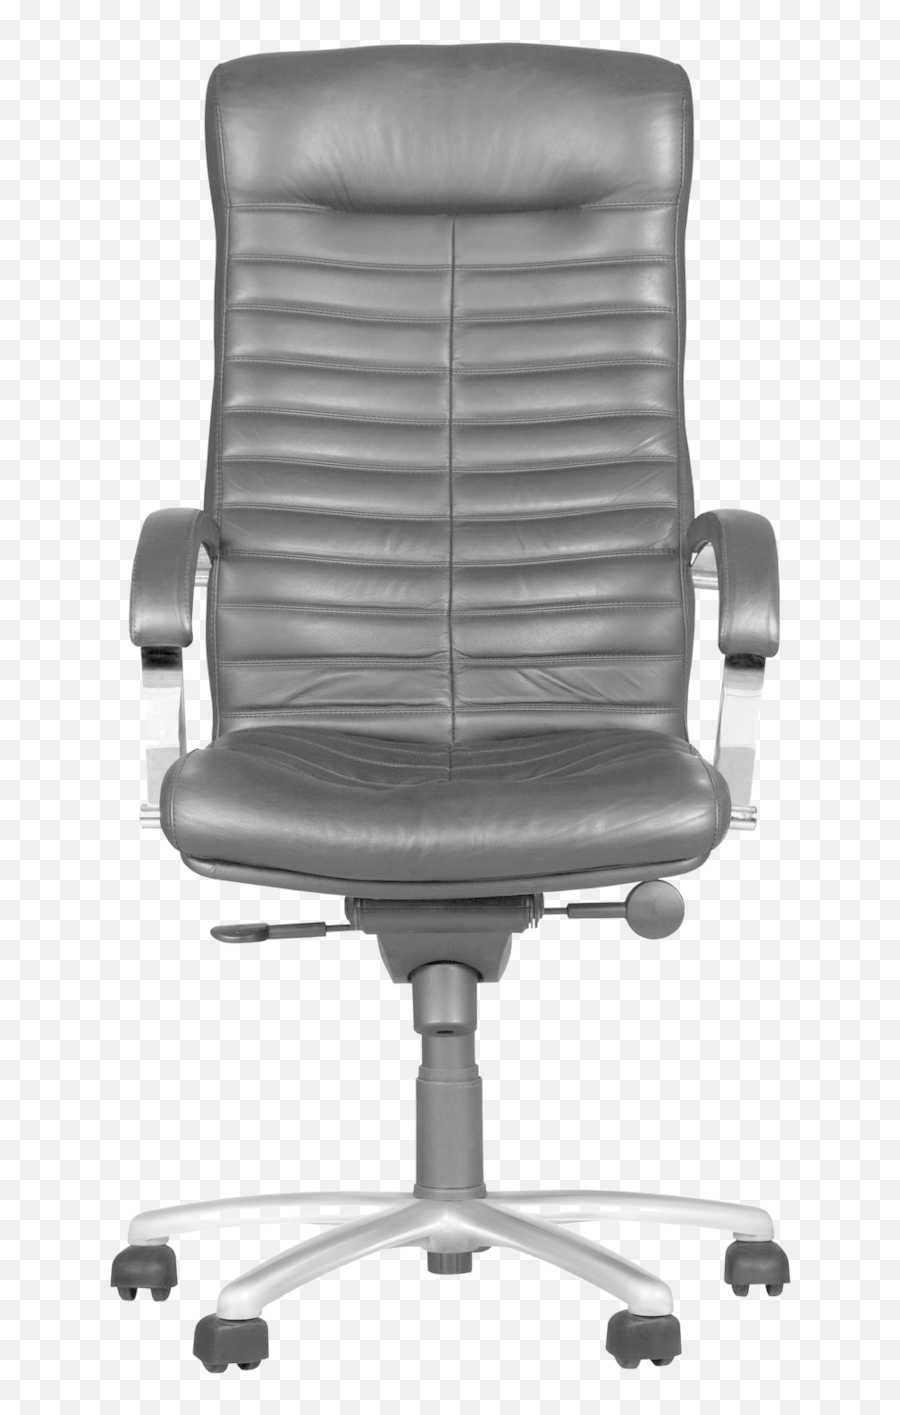 Office Chair Png Image - Office Chair Png Transparent Emoji,Emoji Bike And Arm